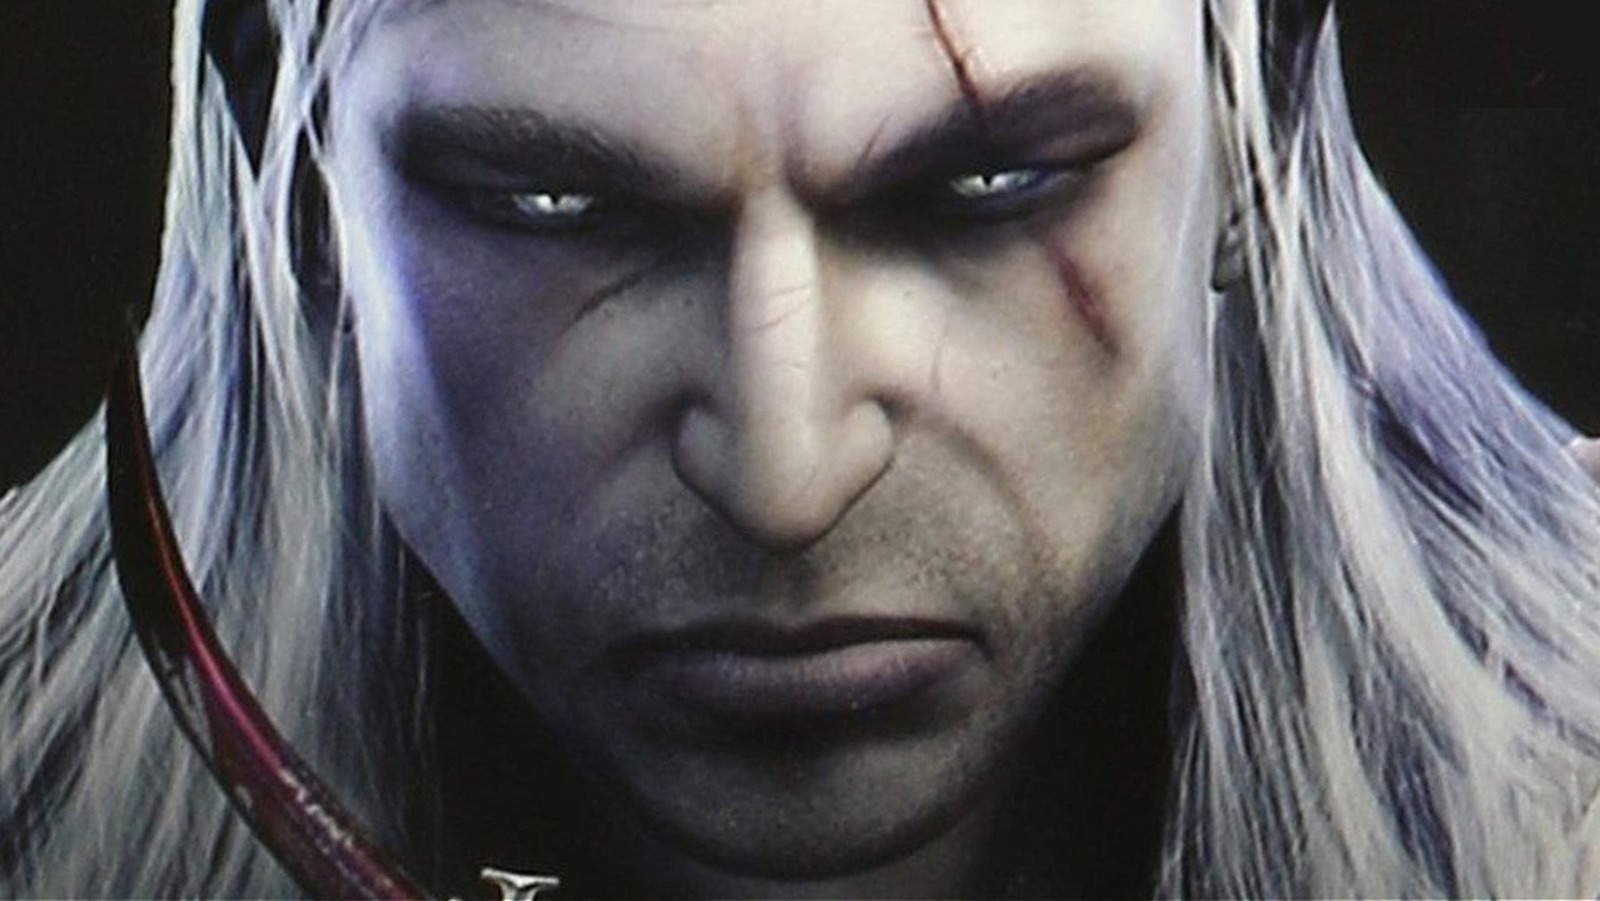 The Witcher remake will be open world, says CD Projekt Red